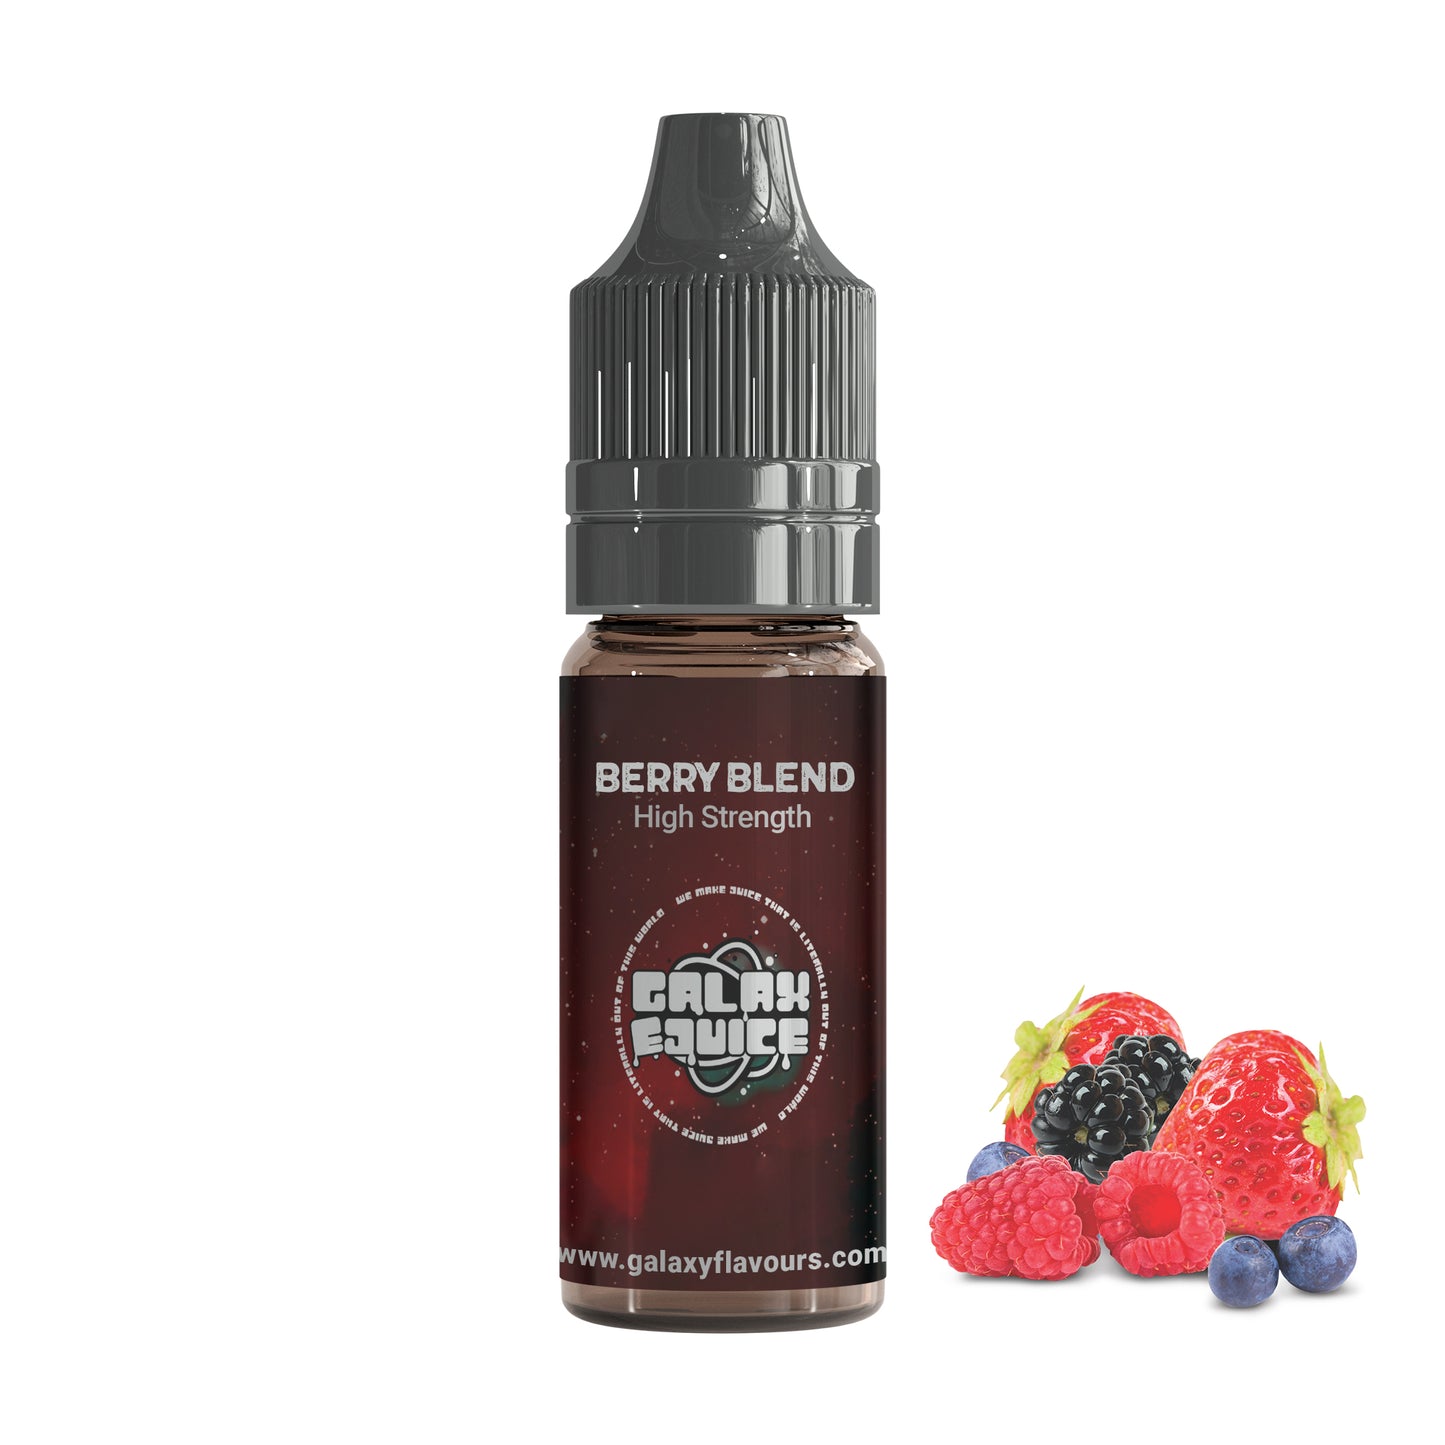 Berry Blend High Strength Professional Flavouring.